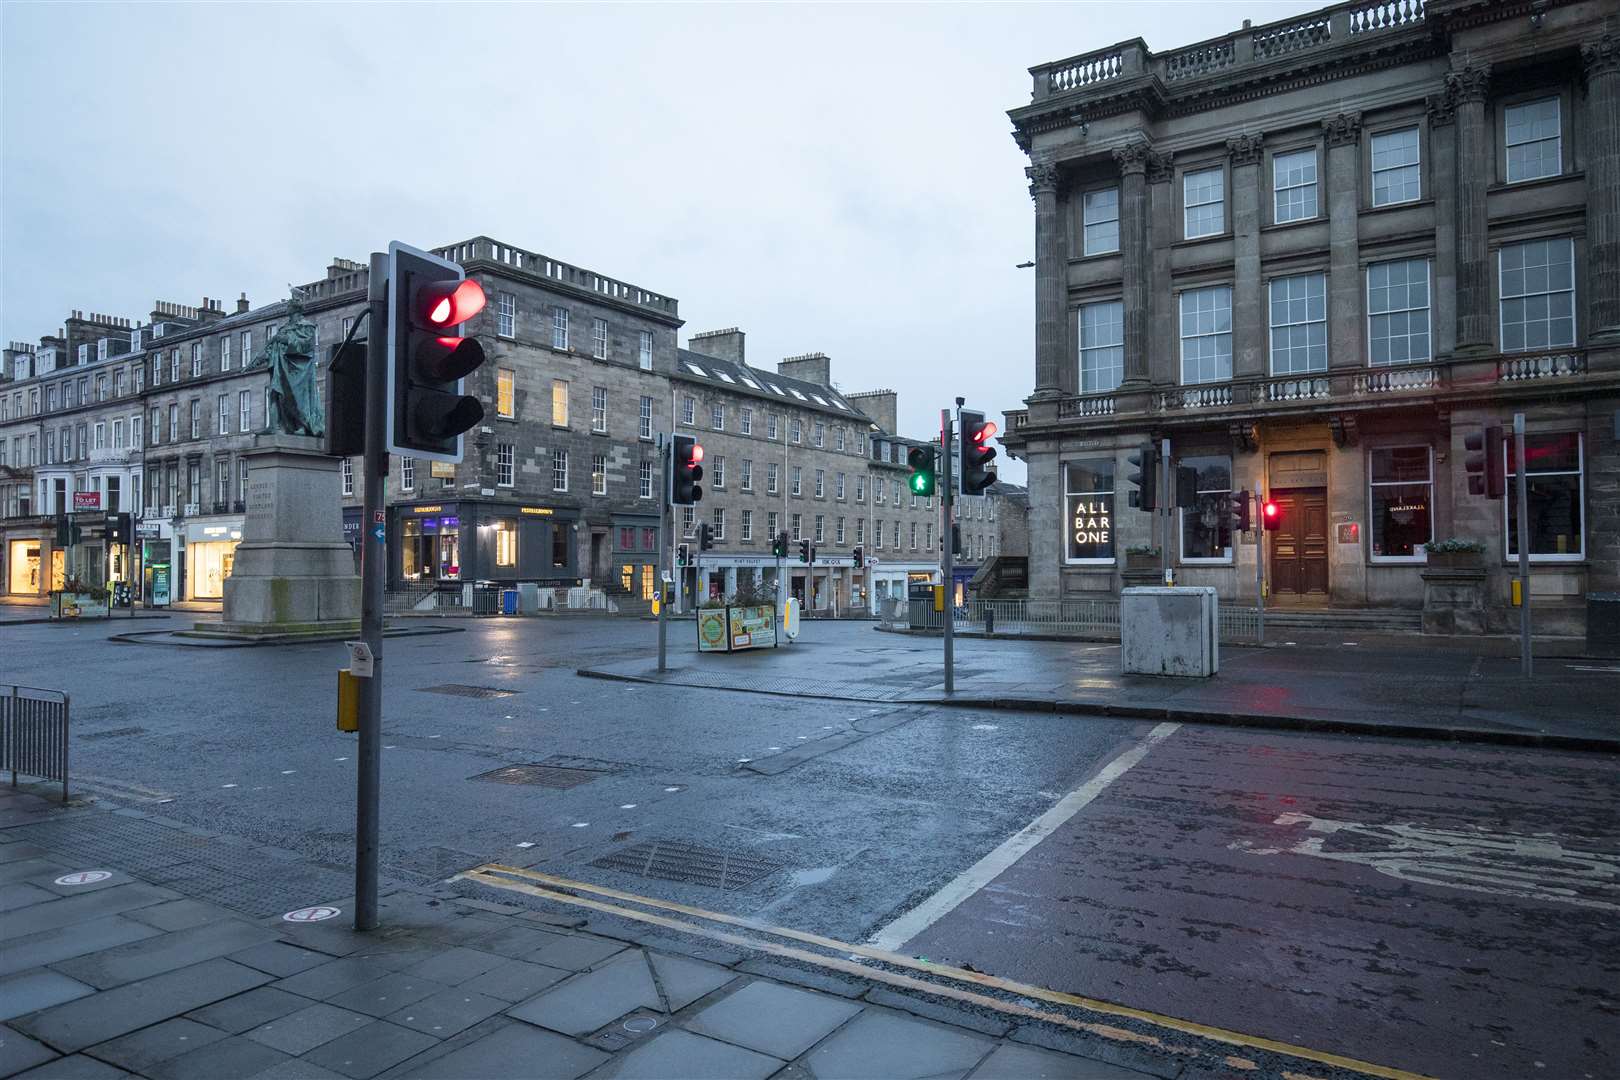 George Street in the Scottish capital Edinburgh was quiet the morning after stricter lockdown measures came into force for mainland Scotland (Jane Barlow/PA)